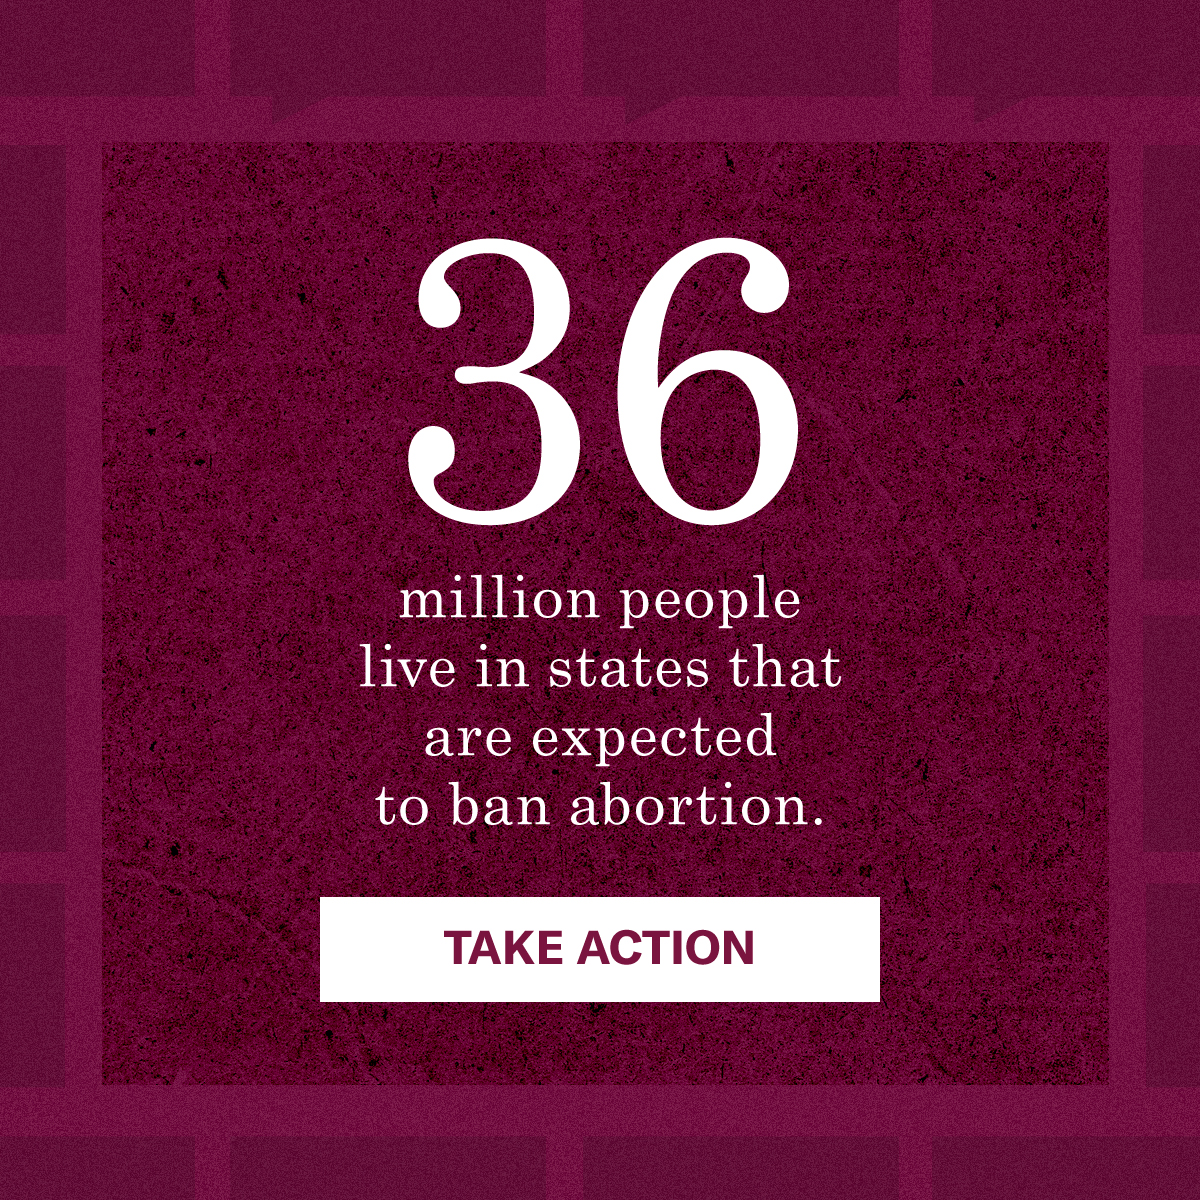 36 million people live in states that are expected to ban abortion.